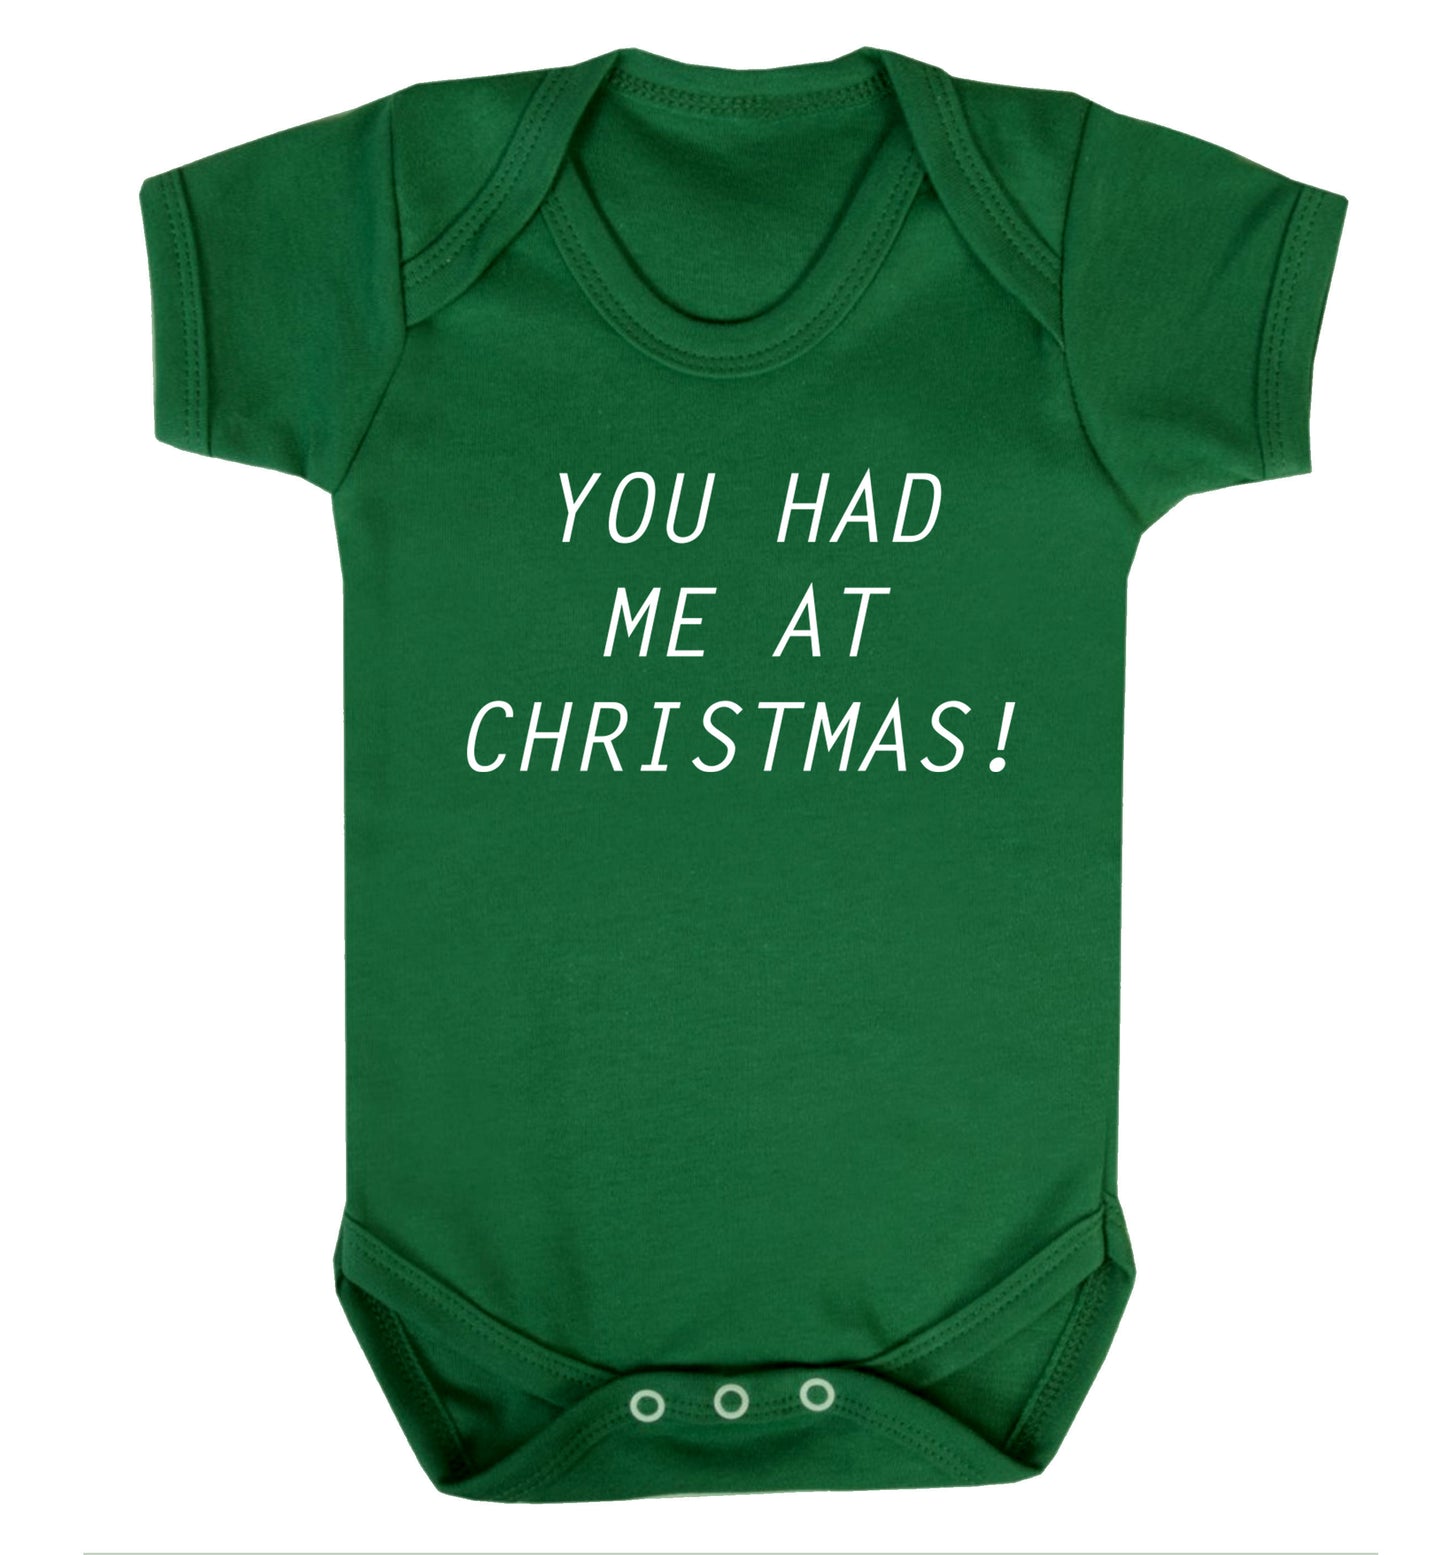 You had me at Christmas Baby Vest green 18-24 months